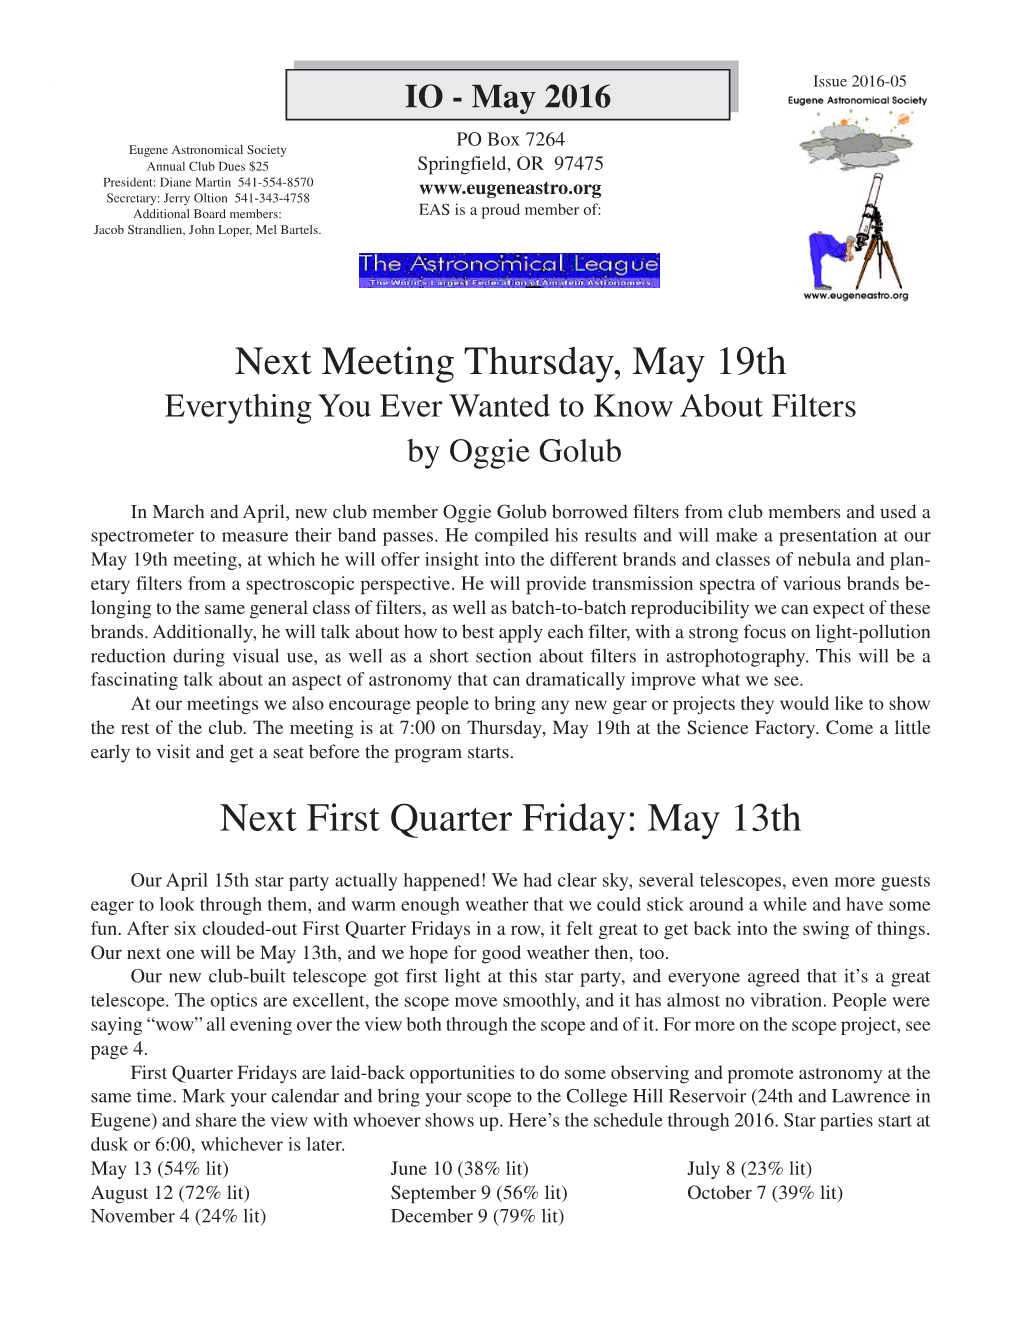 Next First Quarter Friday: May 13Th